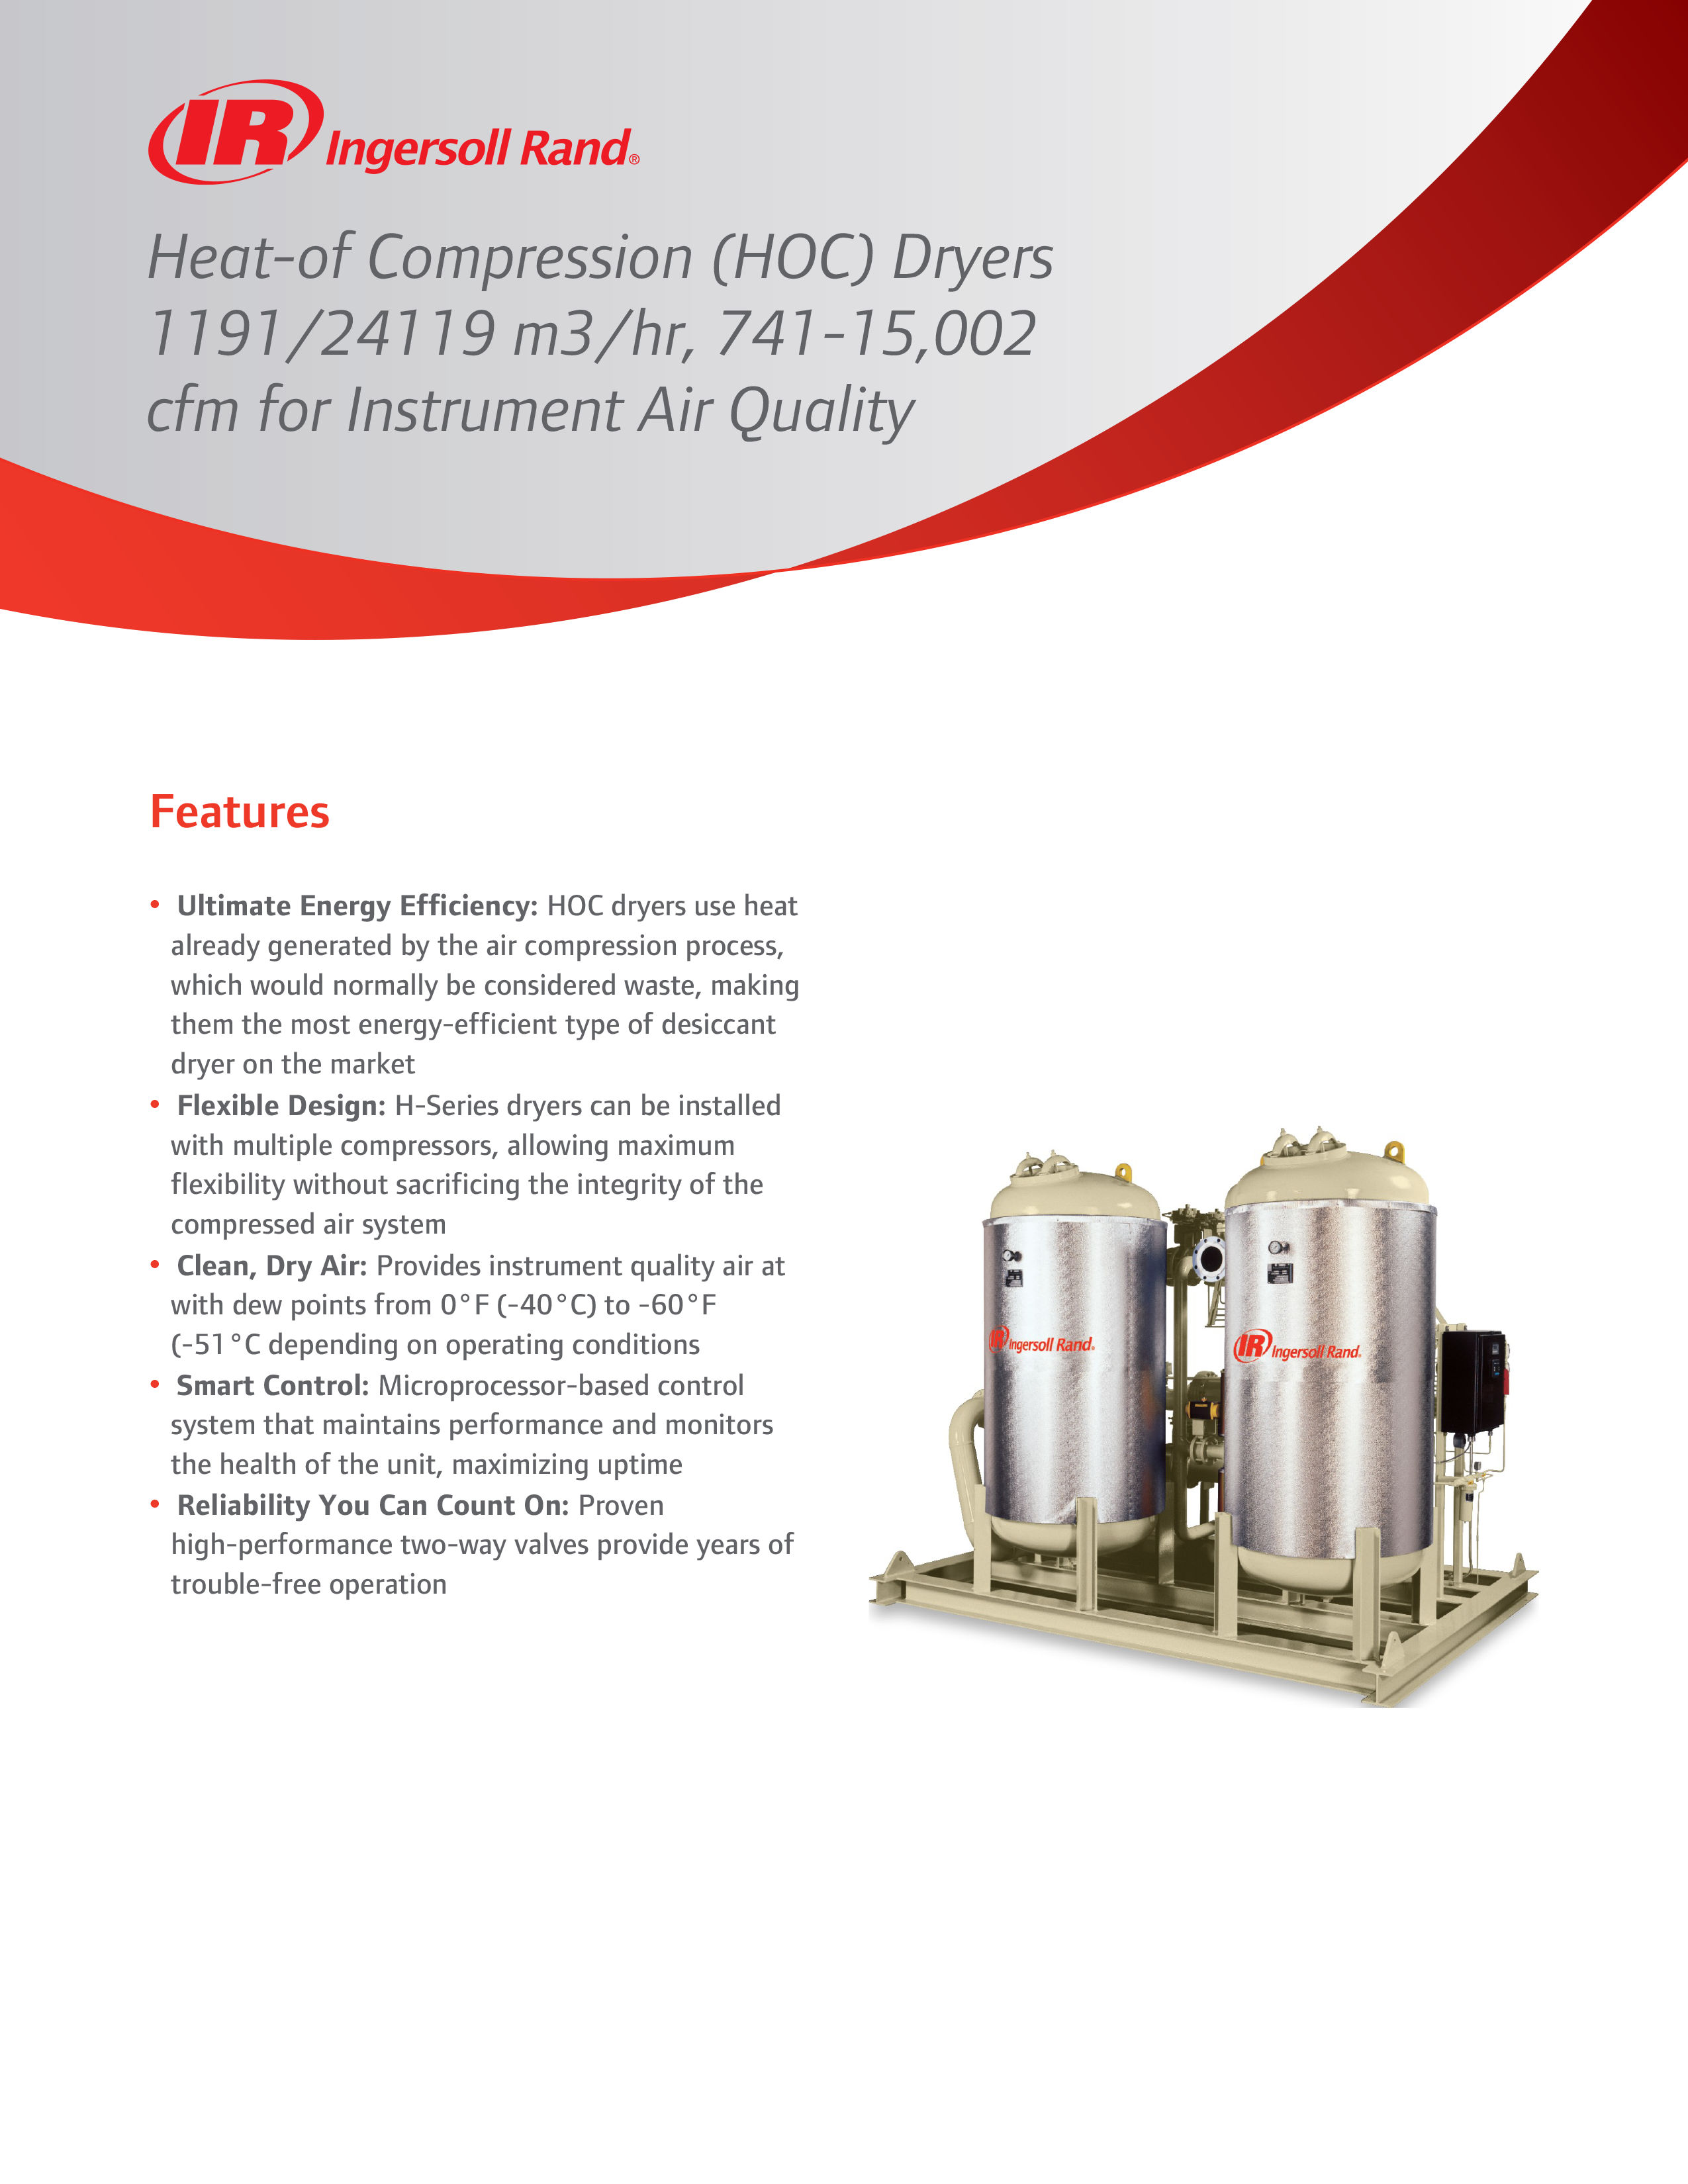 Ingersoll Rand HEAT-OF COMPRESSION